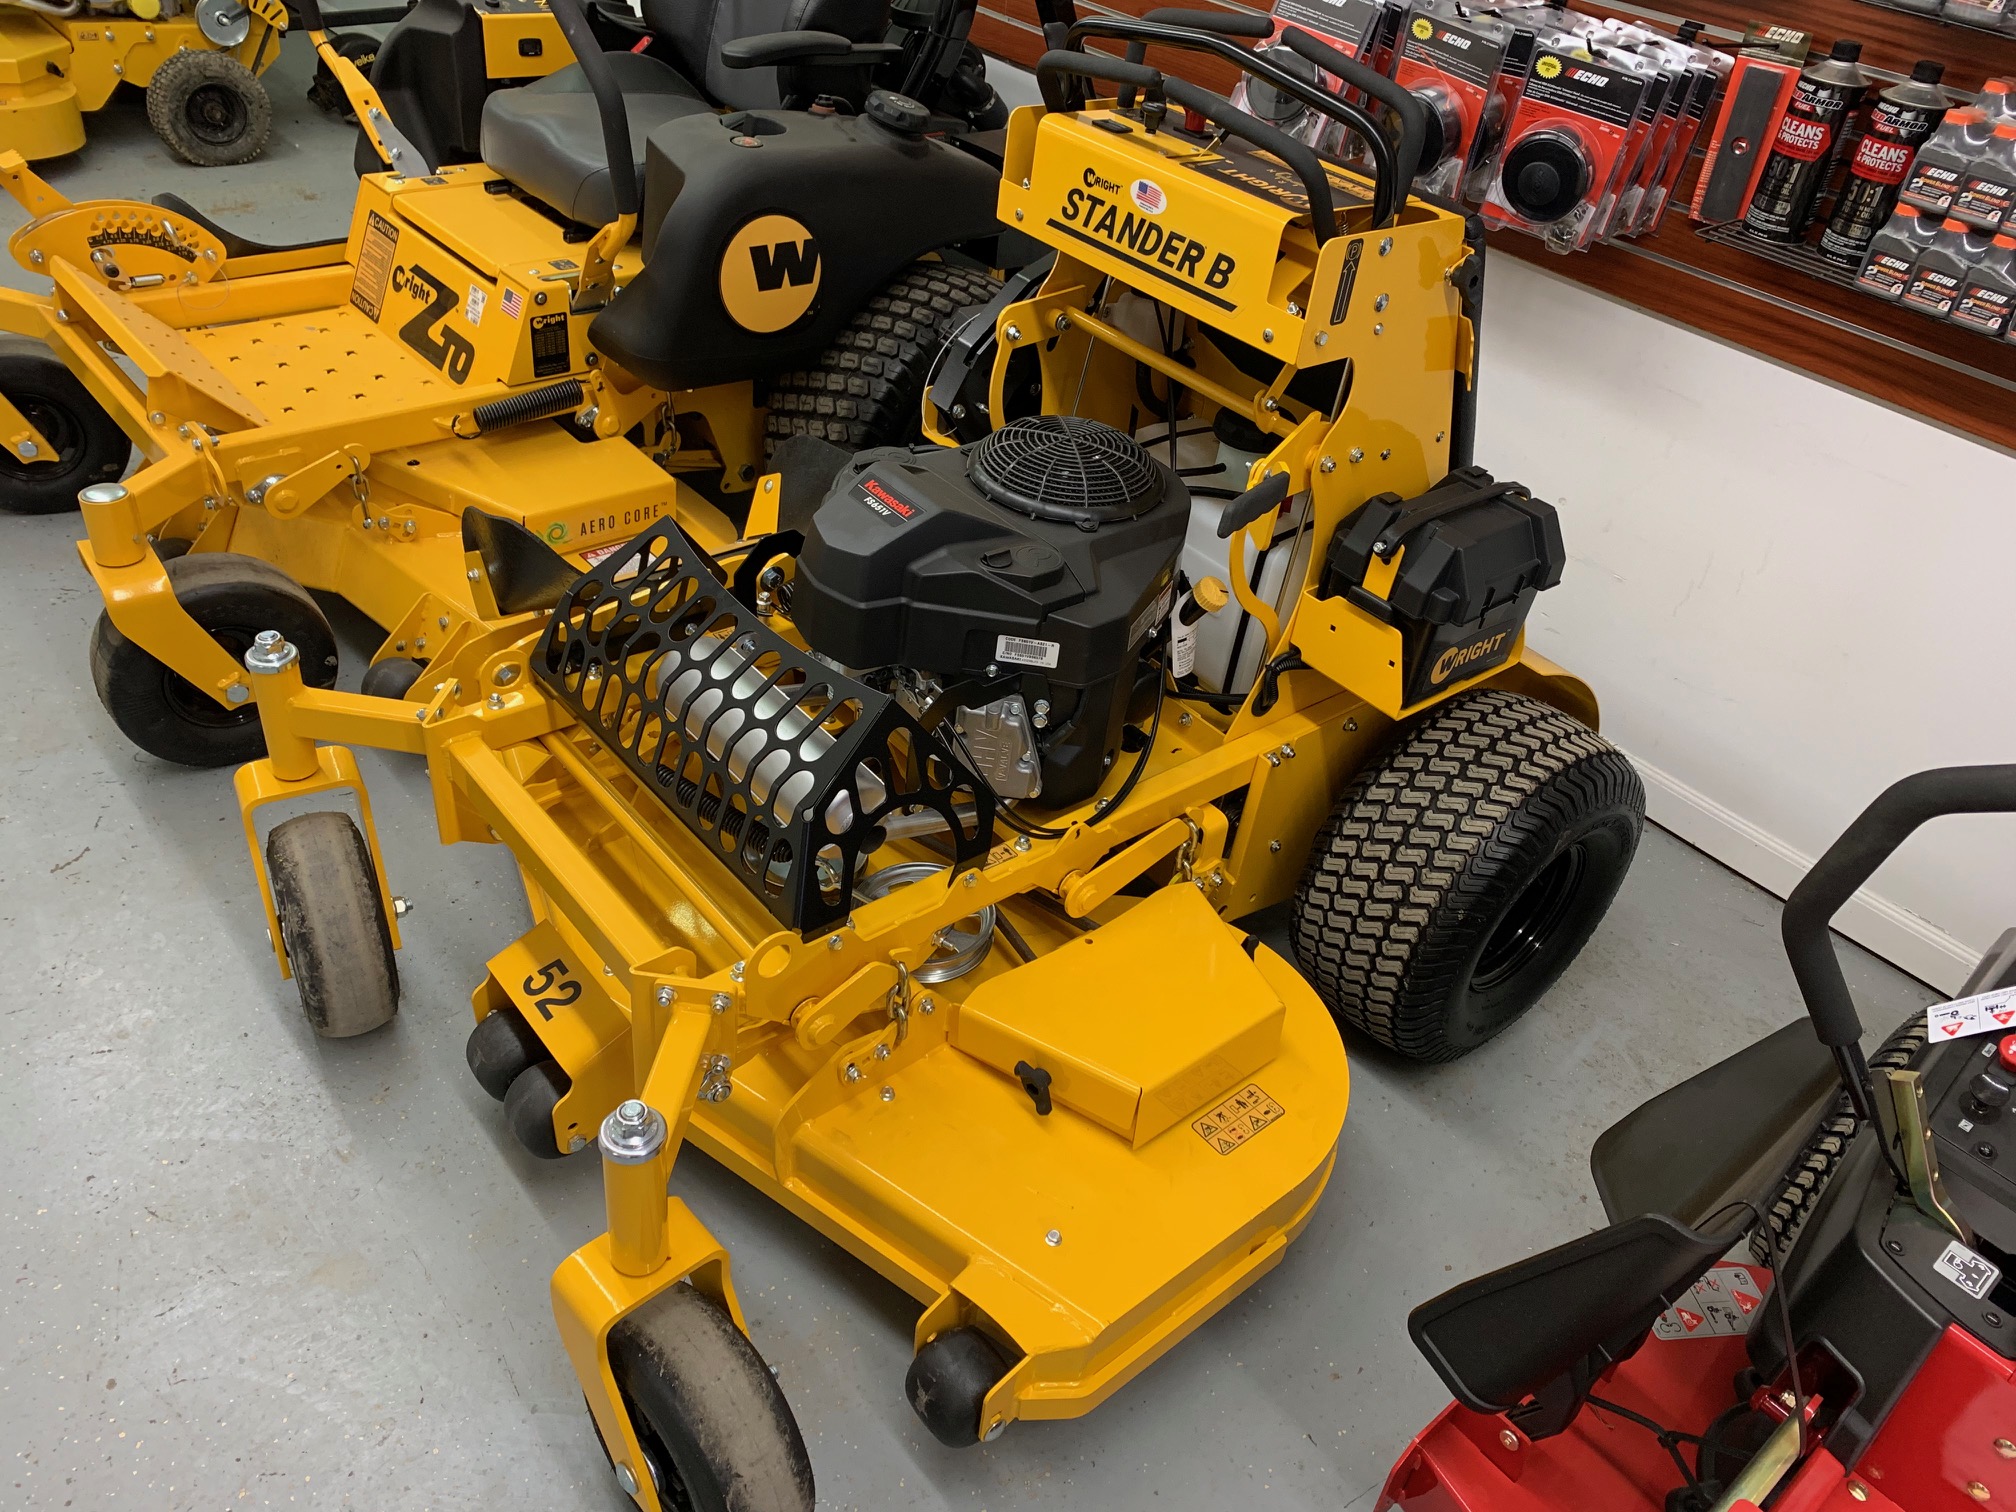 wright stander mower service manual